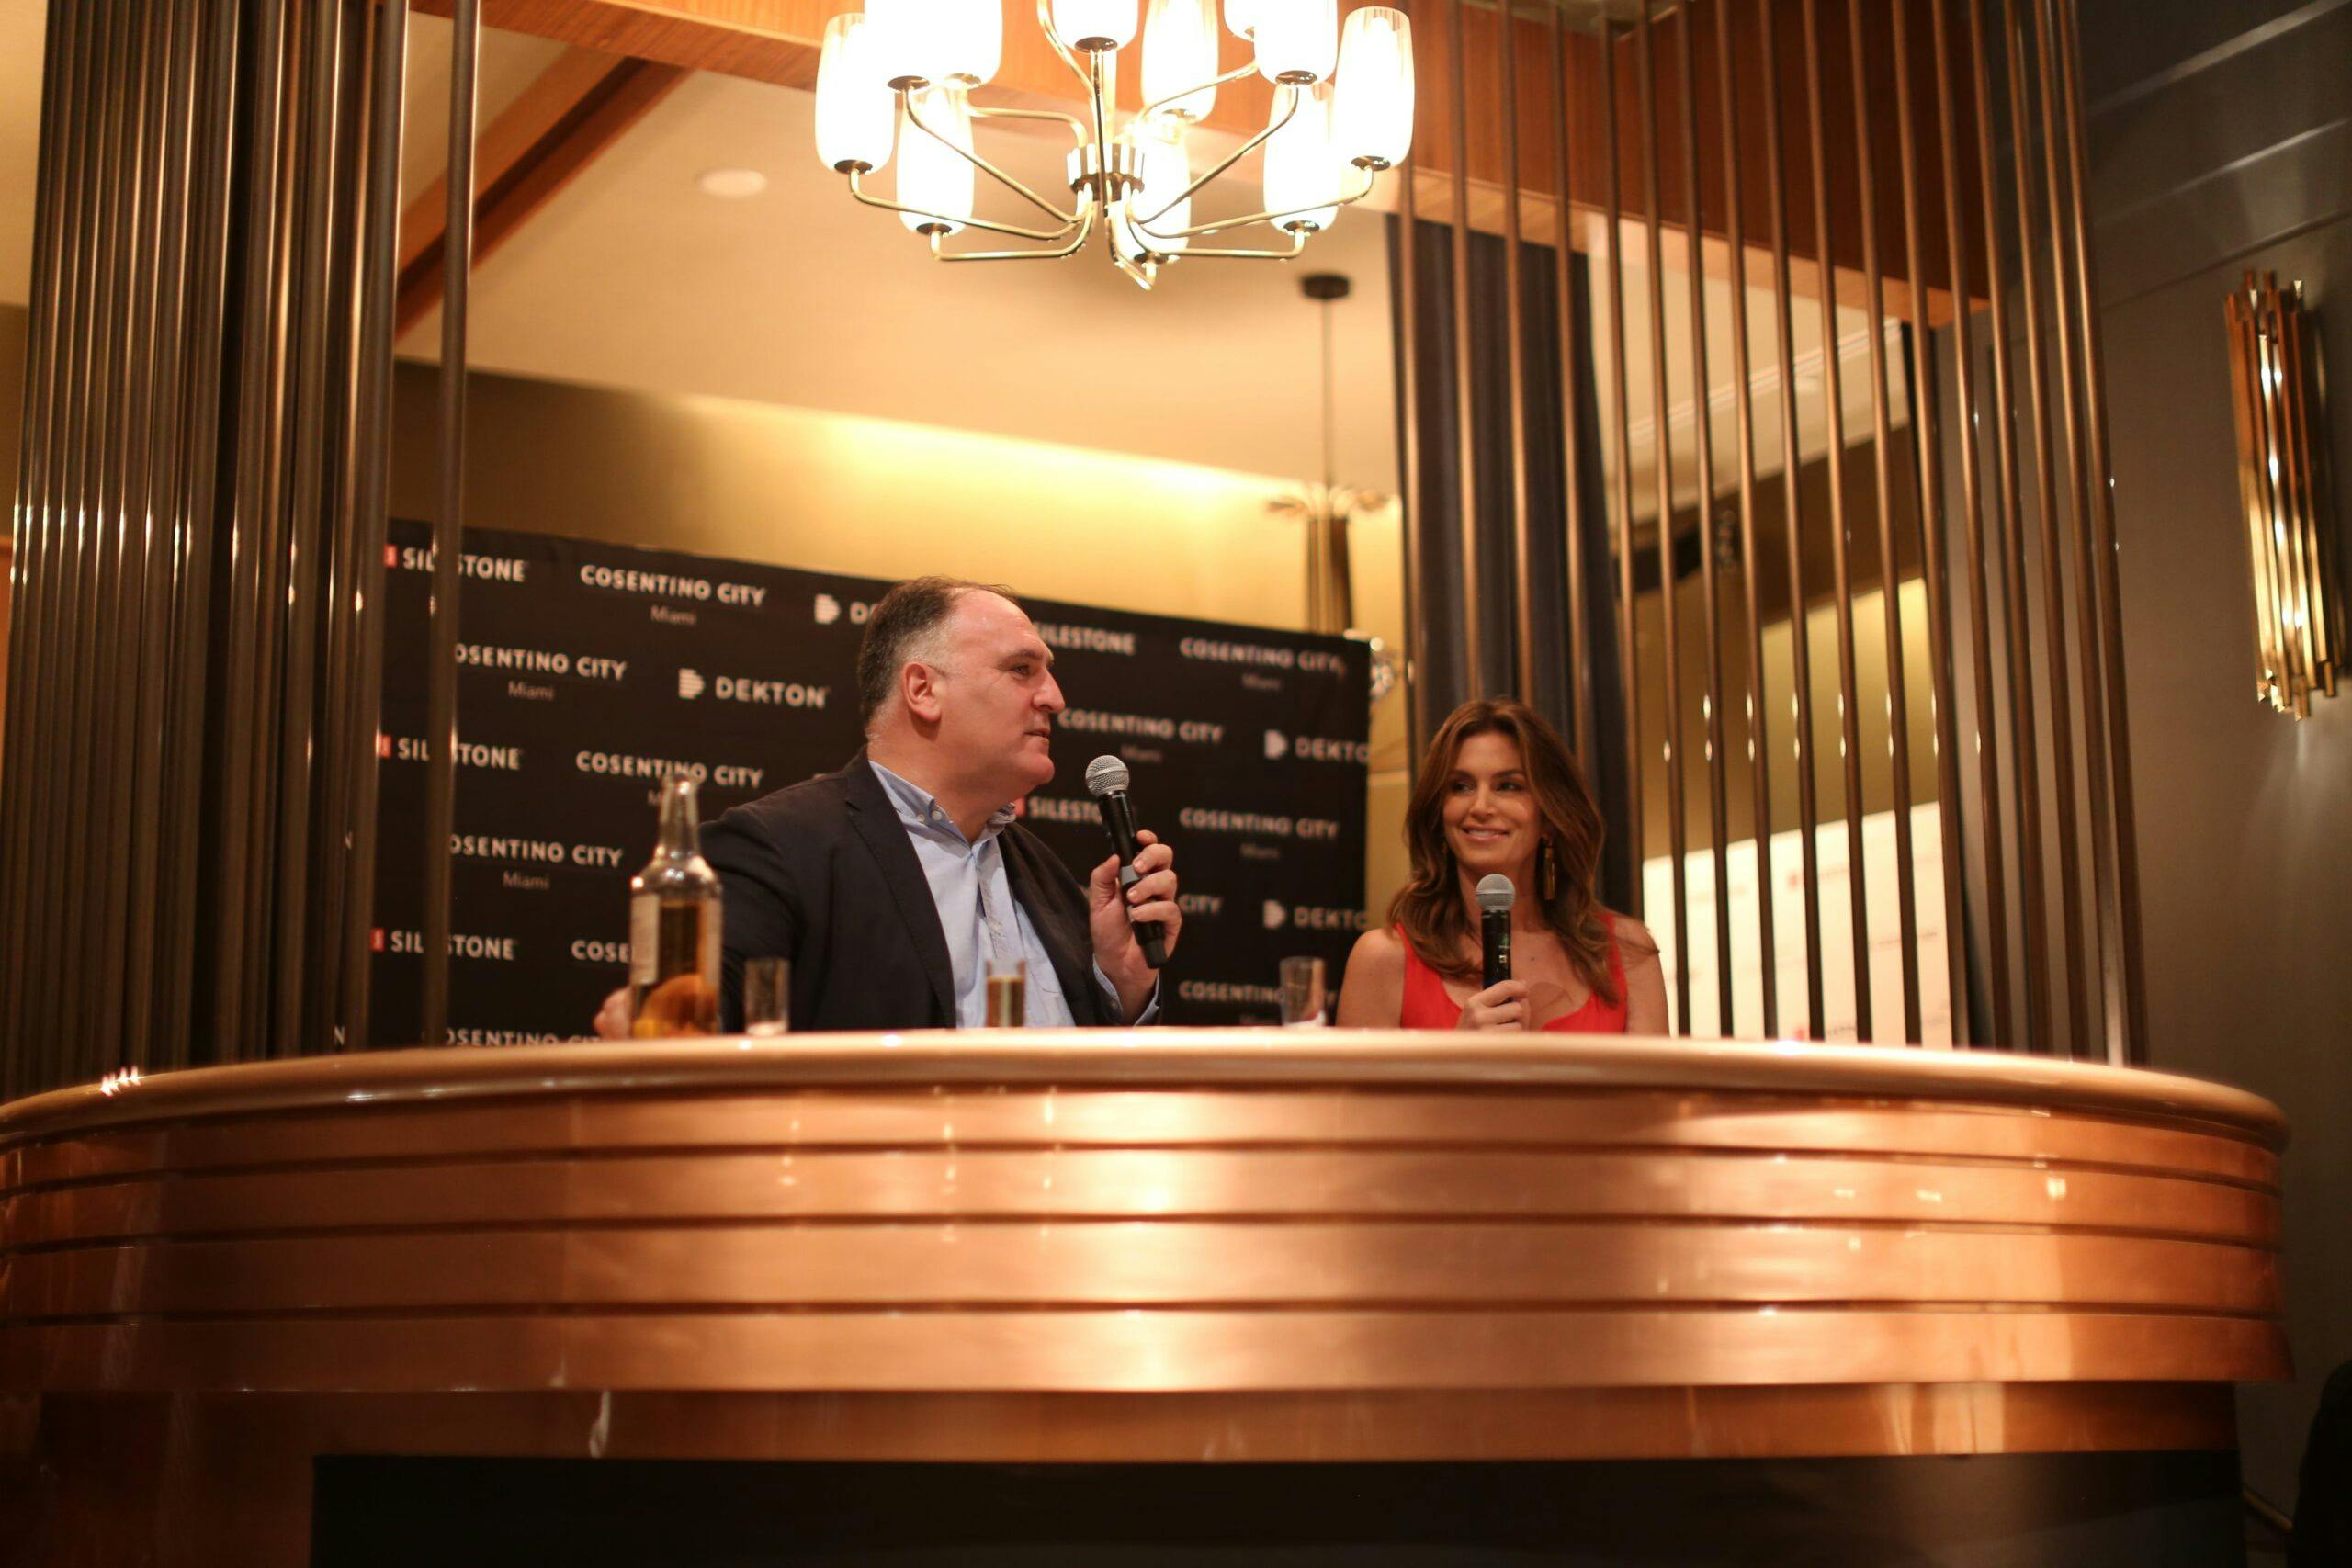 Image number 32 of the current section of Silestone dazzles with Cindy Crawford and José Andrés of Cosentino USA